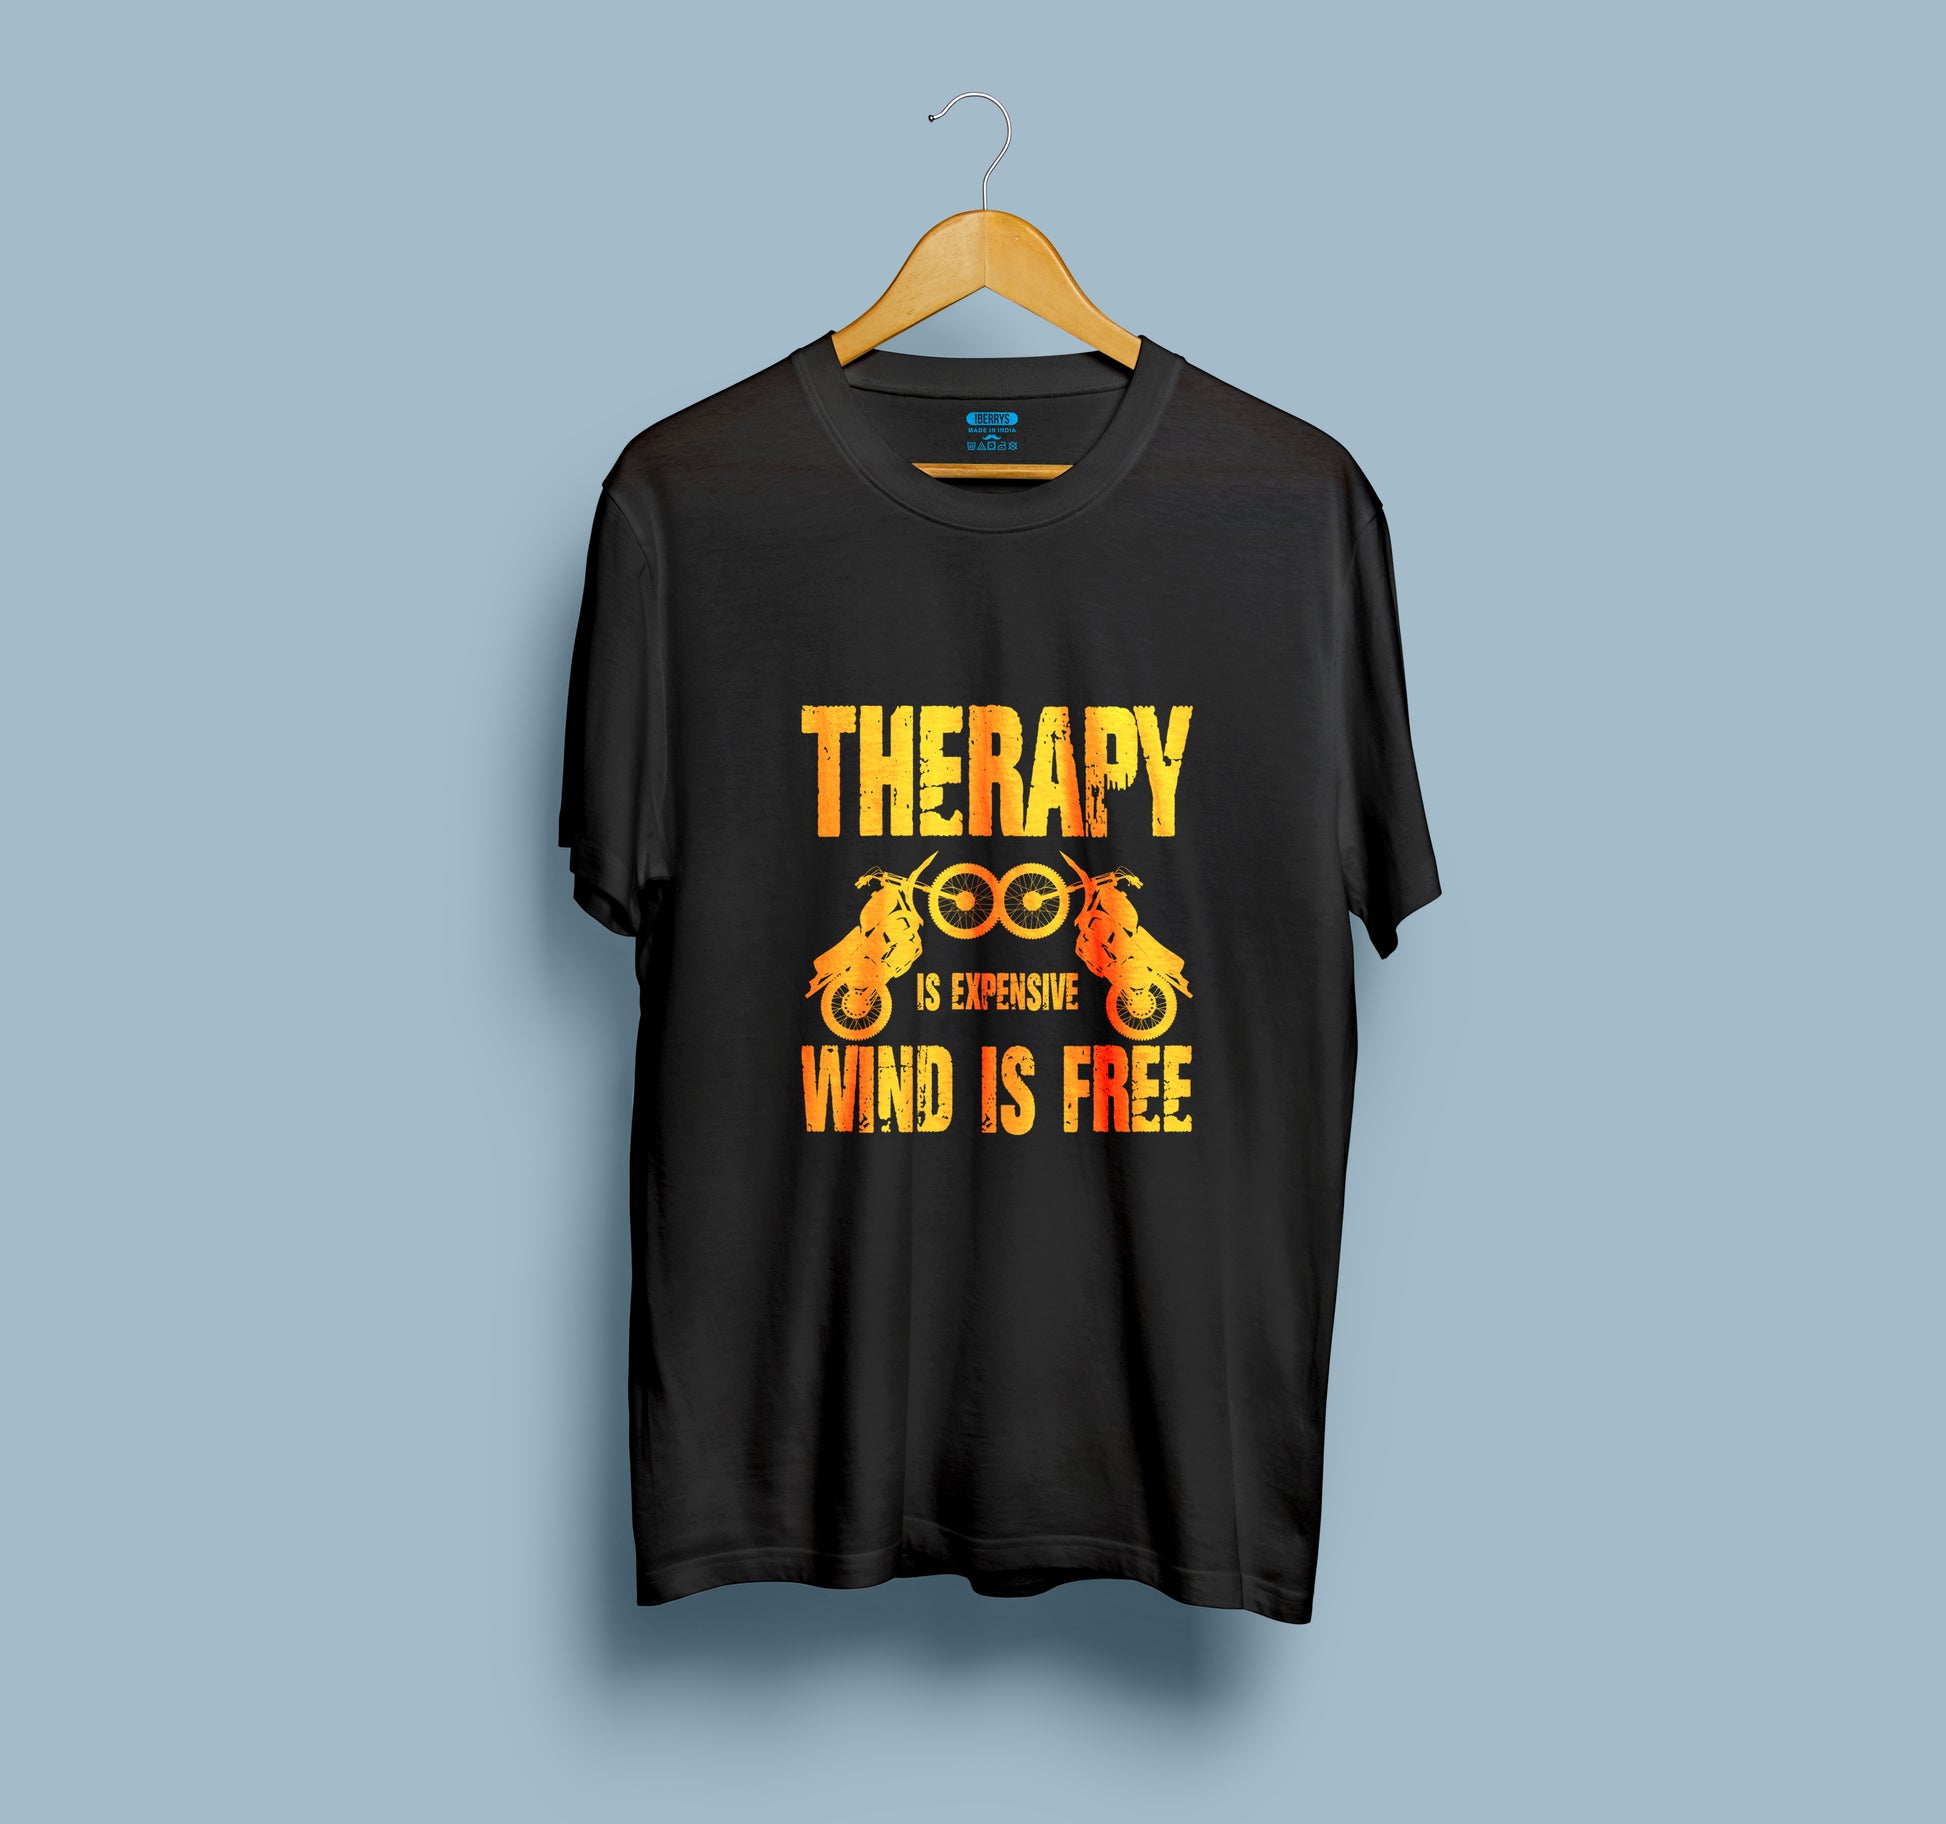 Therapy is expensive wind is free quote Biker t shirts - Black